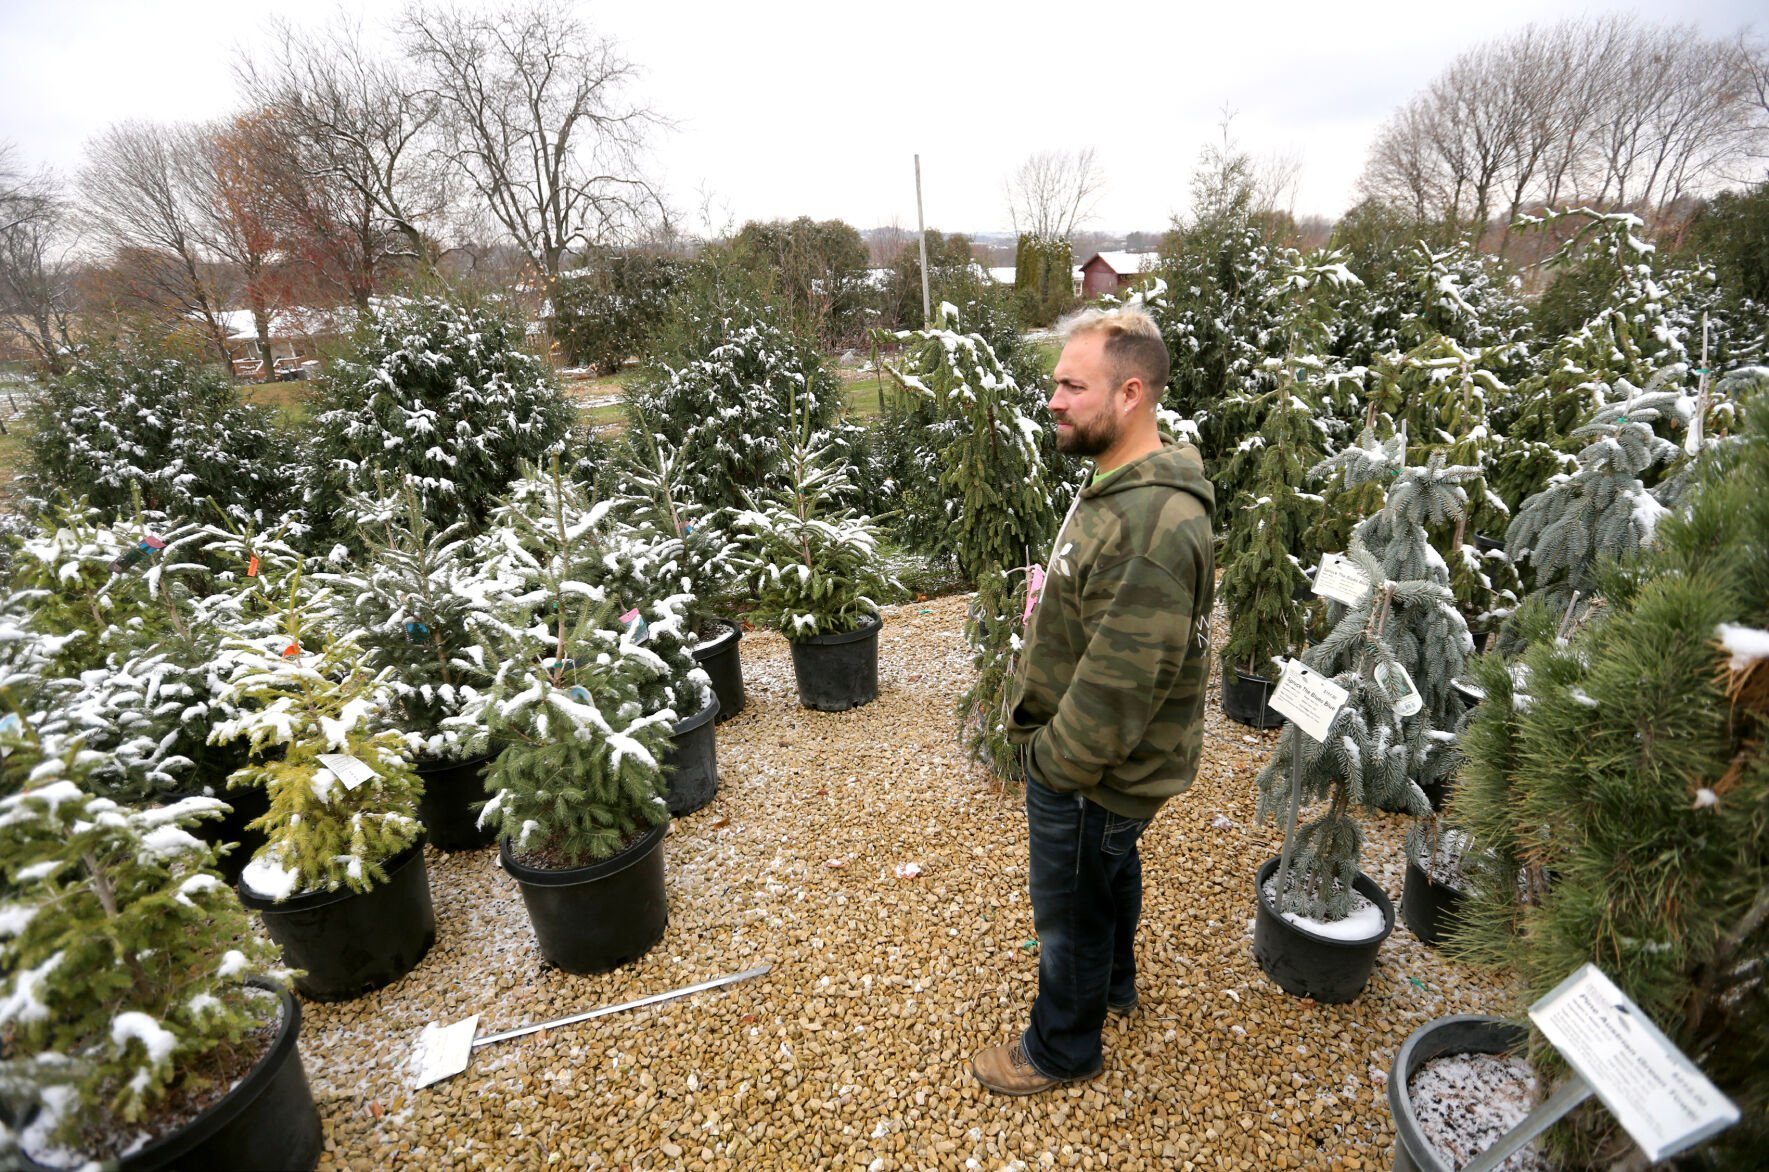 Doug Wagner Jr., a fourth-generation owner, shows off a variety of trees at Wagner Nursery in Asbury, Iowa. He says Christmas trees are another way to bring in revenue for the business.    PHOTO CREDIT: JESSICA REILLY, Telegraph Herald